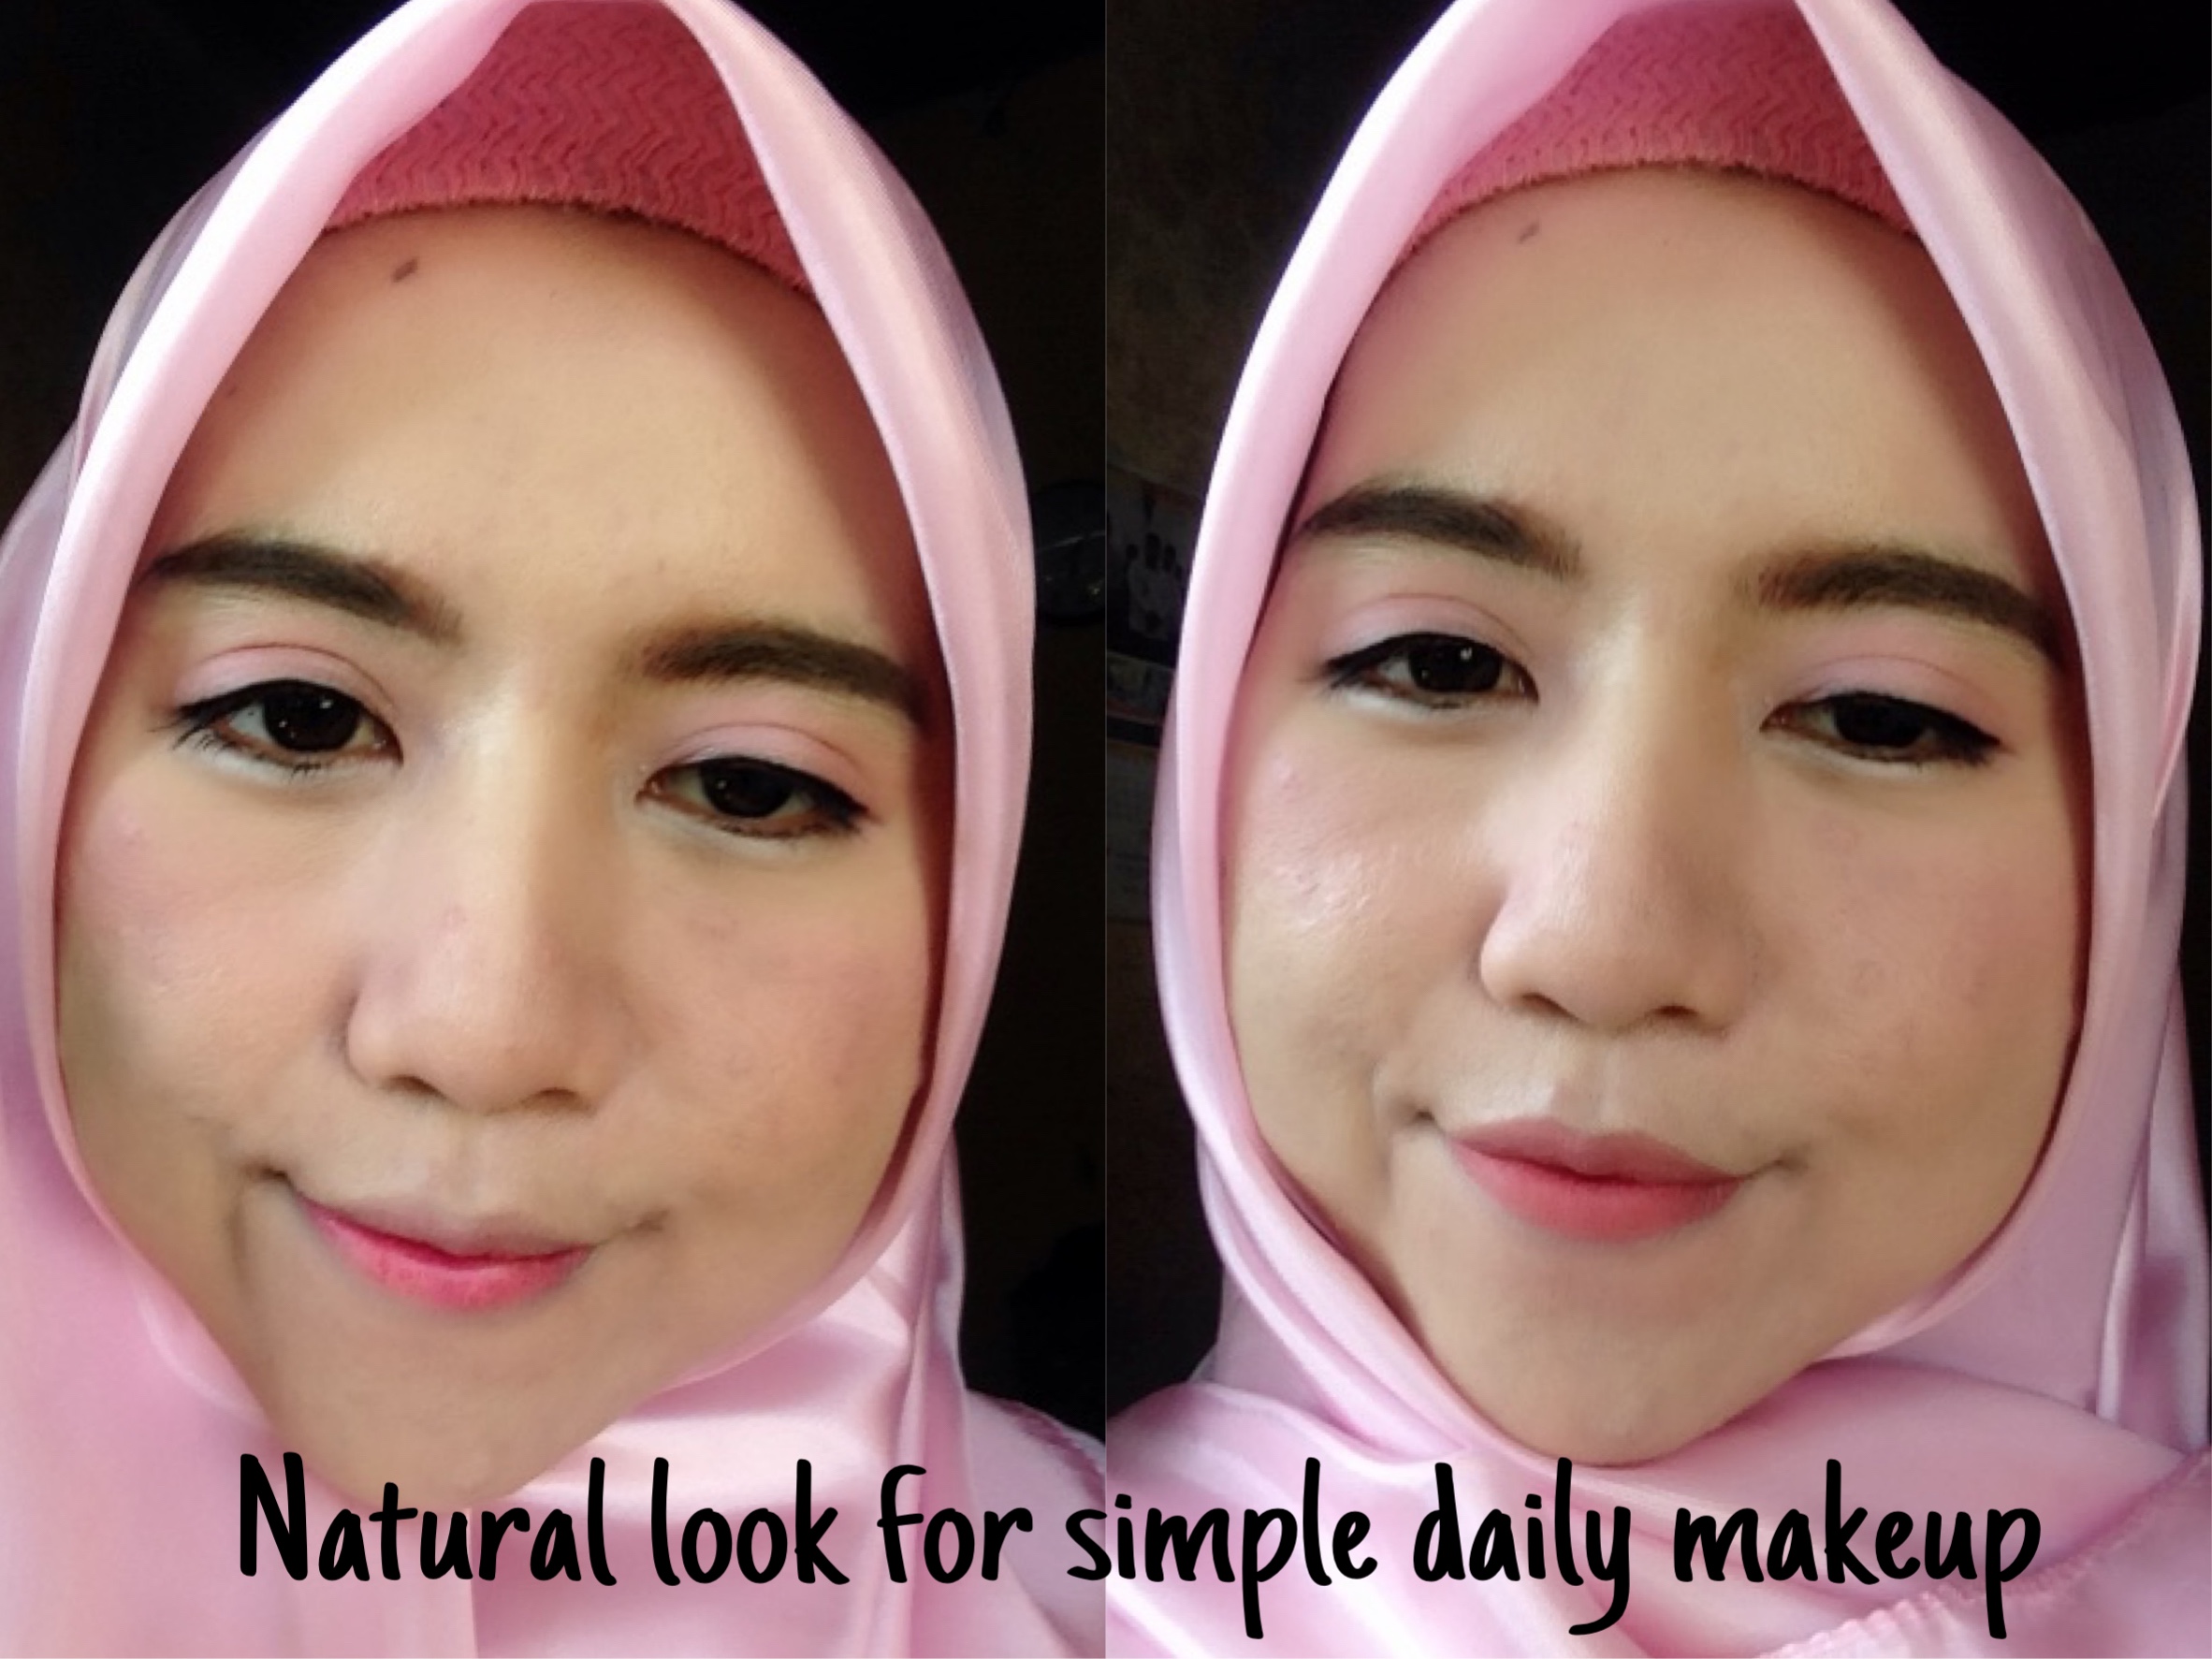 Natural look for simple daily makeup